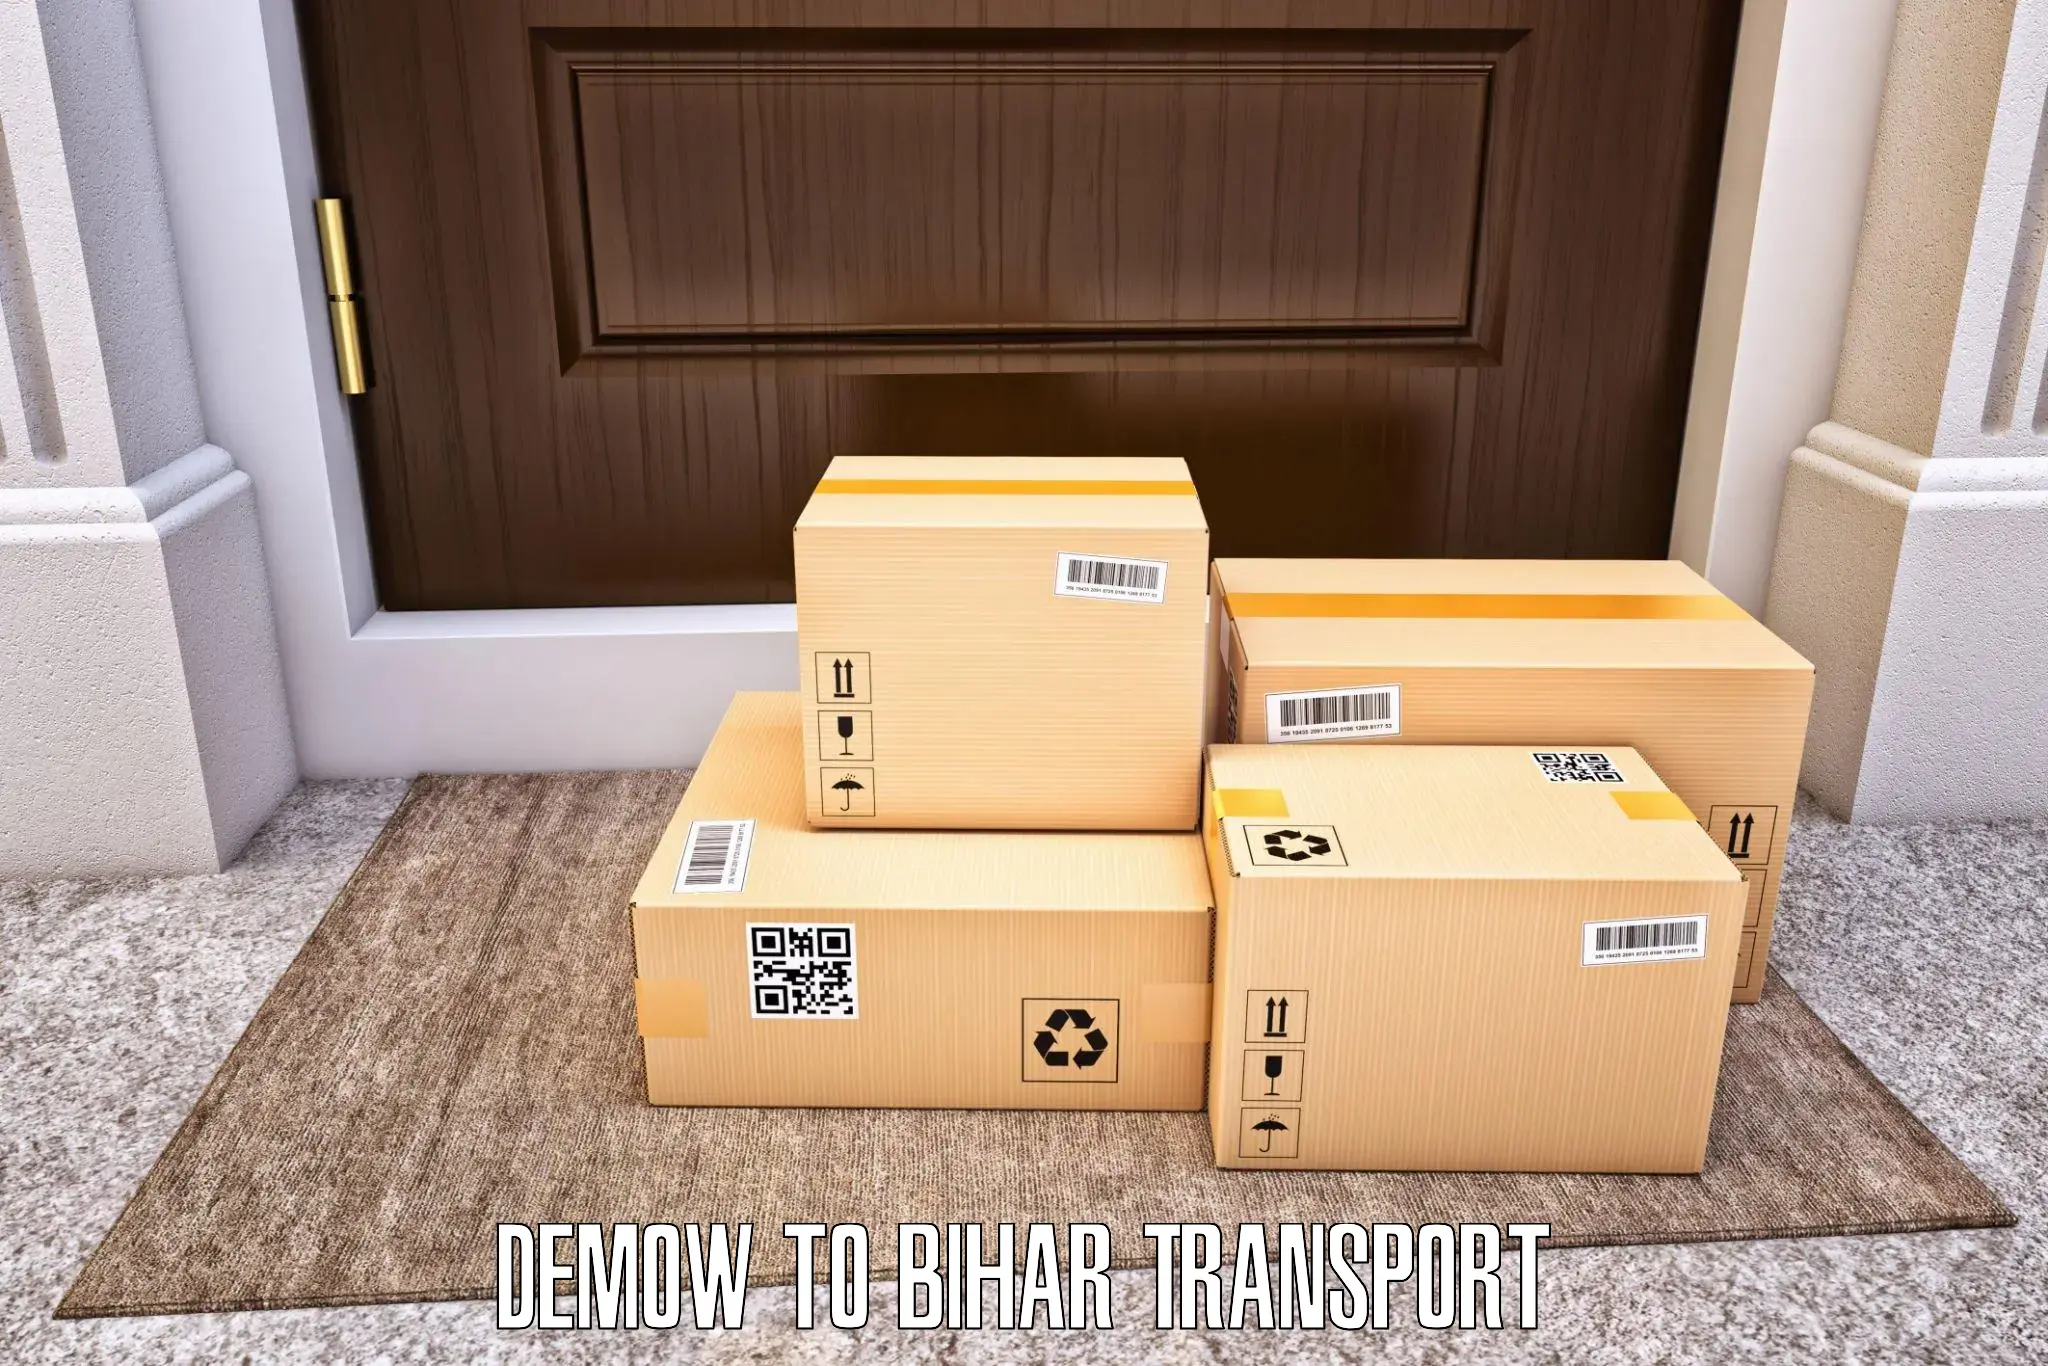 Transport in sharing Demow to Ekma